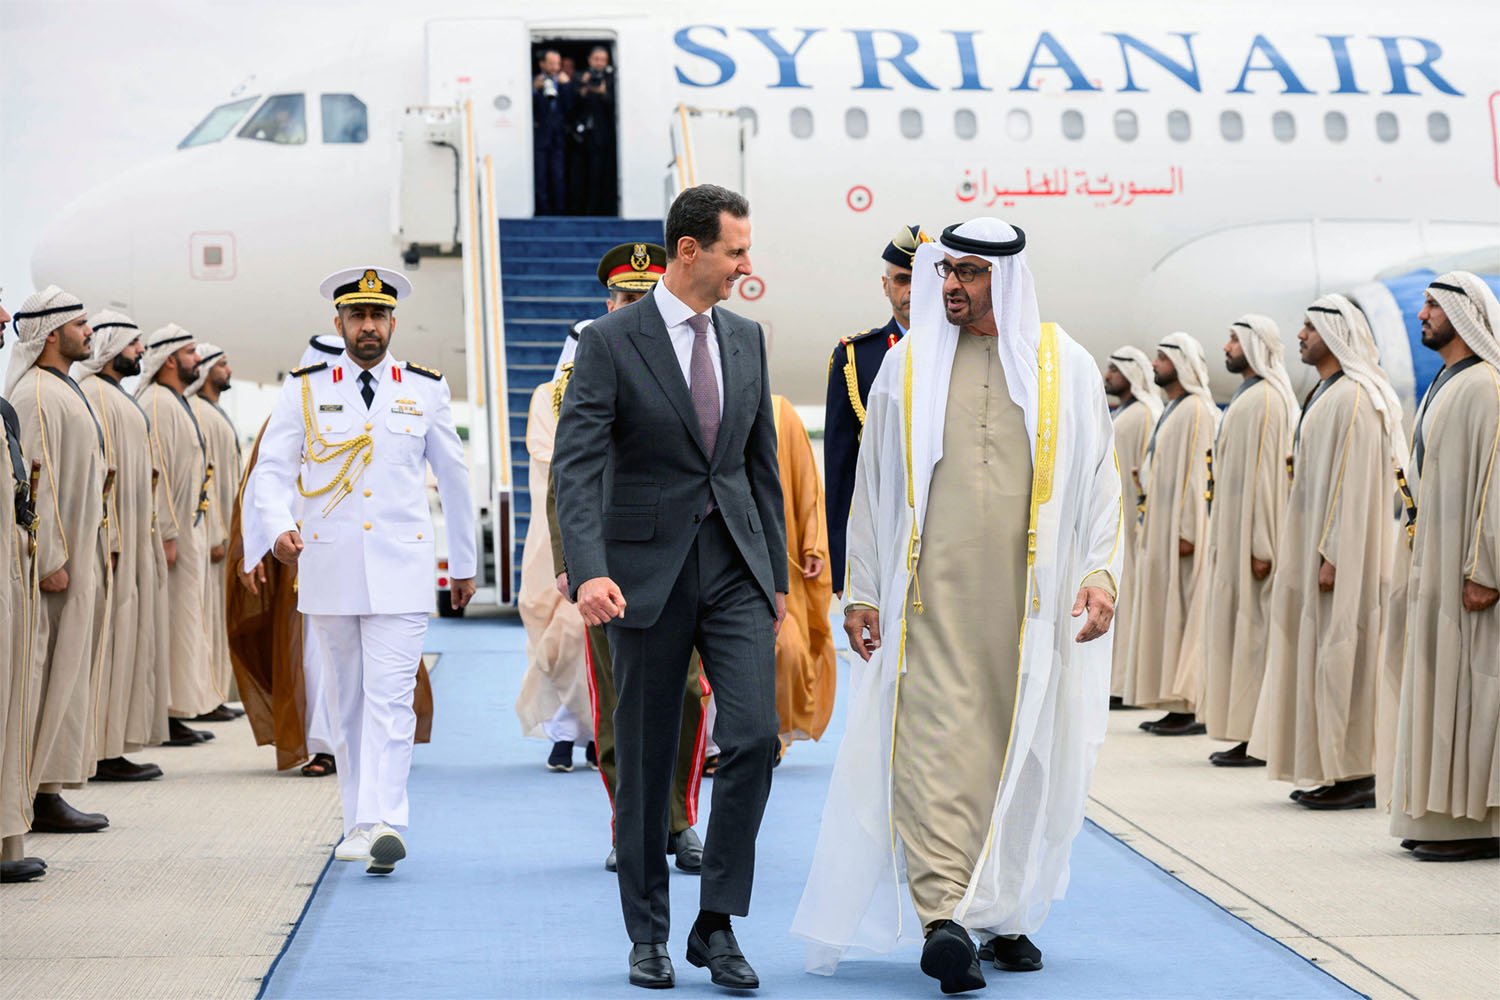 It's Assad's second visit to the UAE since the Syrian civil war began in 2011